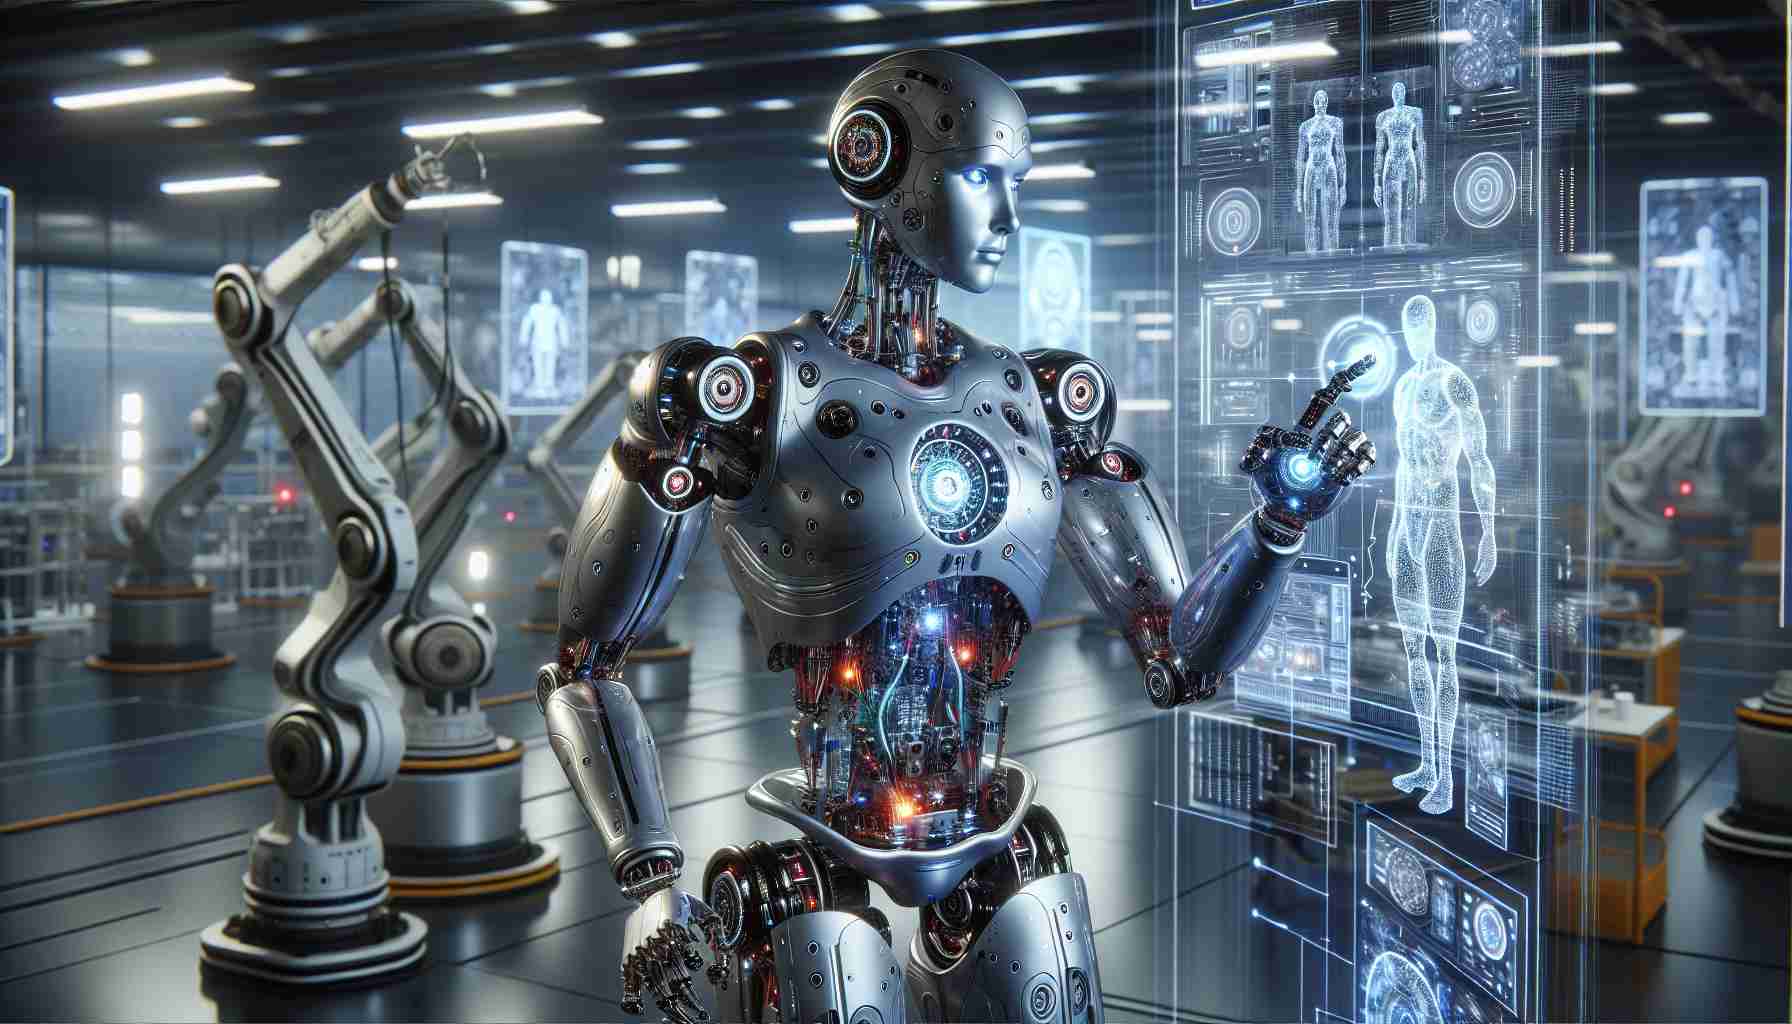 A high-definition, realistic image that represents the concept of 'Advanced Robotics: Enhancing Task Completion with Cutting-Edge Technology'. The image portrays an advanced humanoid robot with metallic silver body, intricate circuitry visible under translucent panels and LED lights embedded in key joints. The robot, in the process of manipulating complex machinery using precise movements, illustrates AI-driven task completion. In the background, a futuristic workshop filled with advanced equipment and tools like robotic arms, high-end computers, and holographic screens, indicating the cutting-edge technology at play.